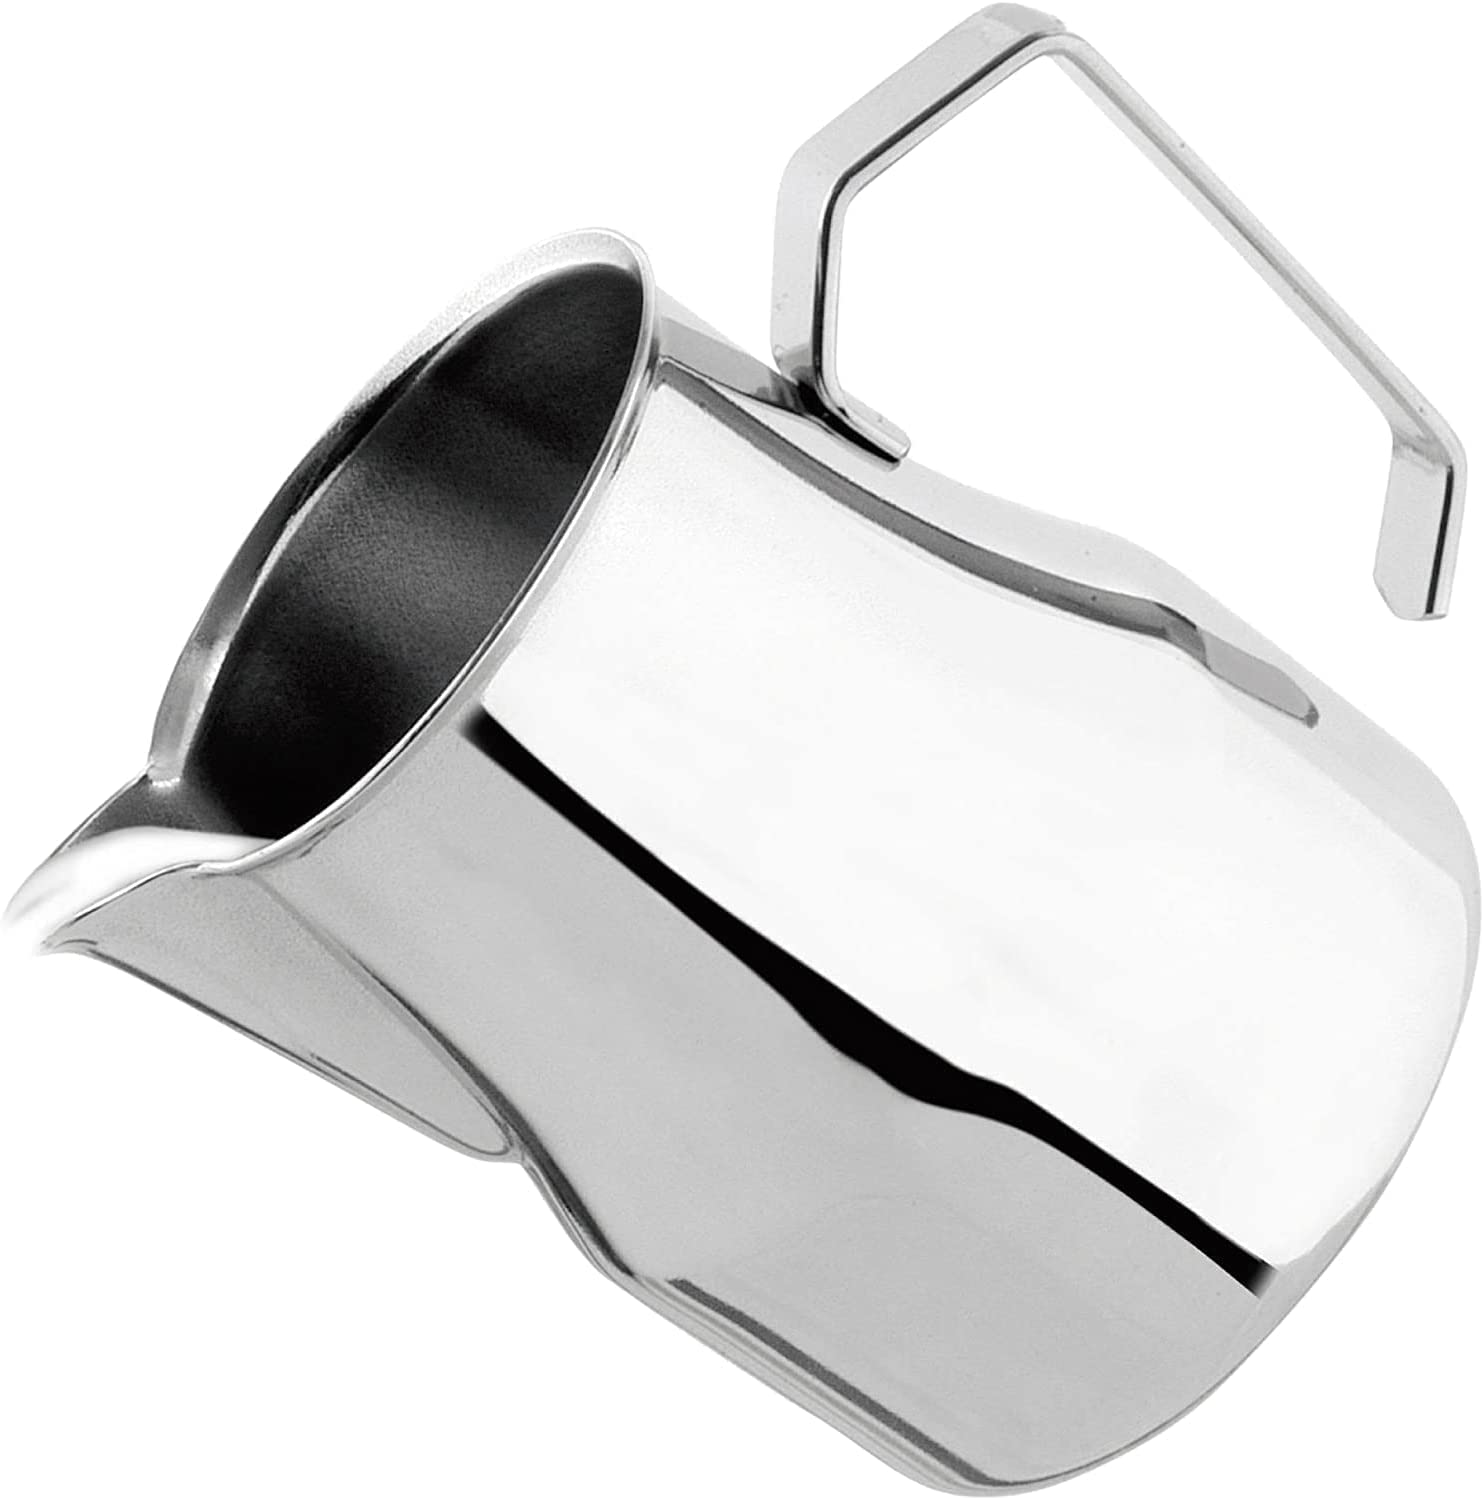 Stainless Steel Milk Jug Special Latte Capuccino Art Spout - Made In Italy By Motta (250 ML)